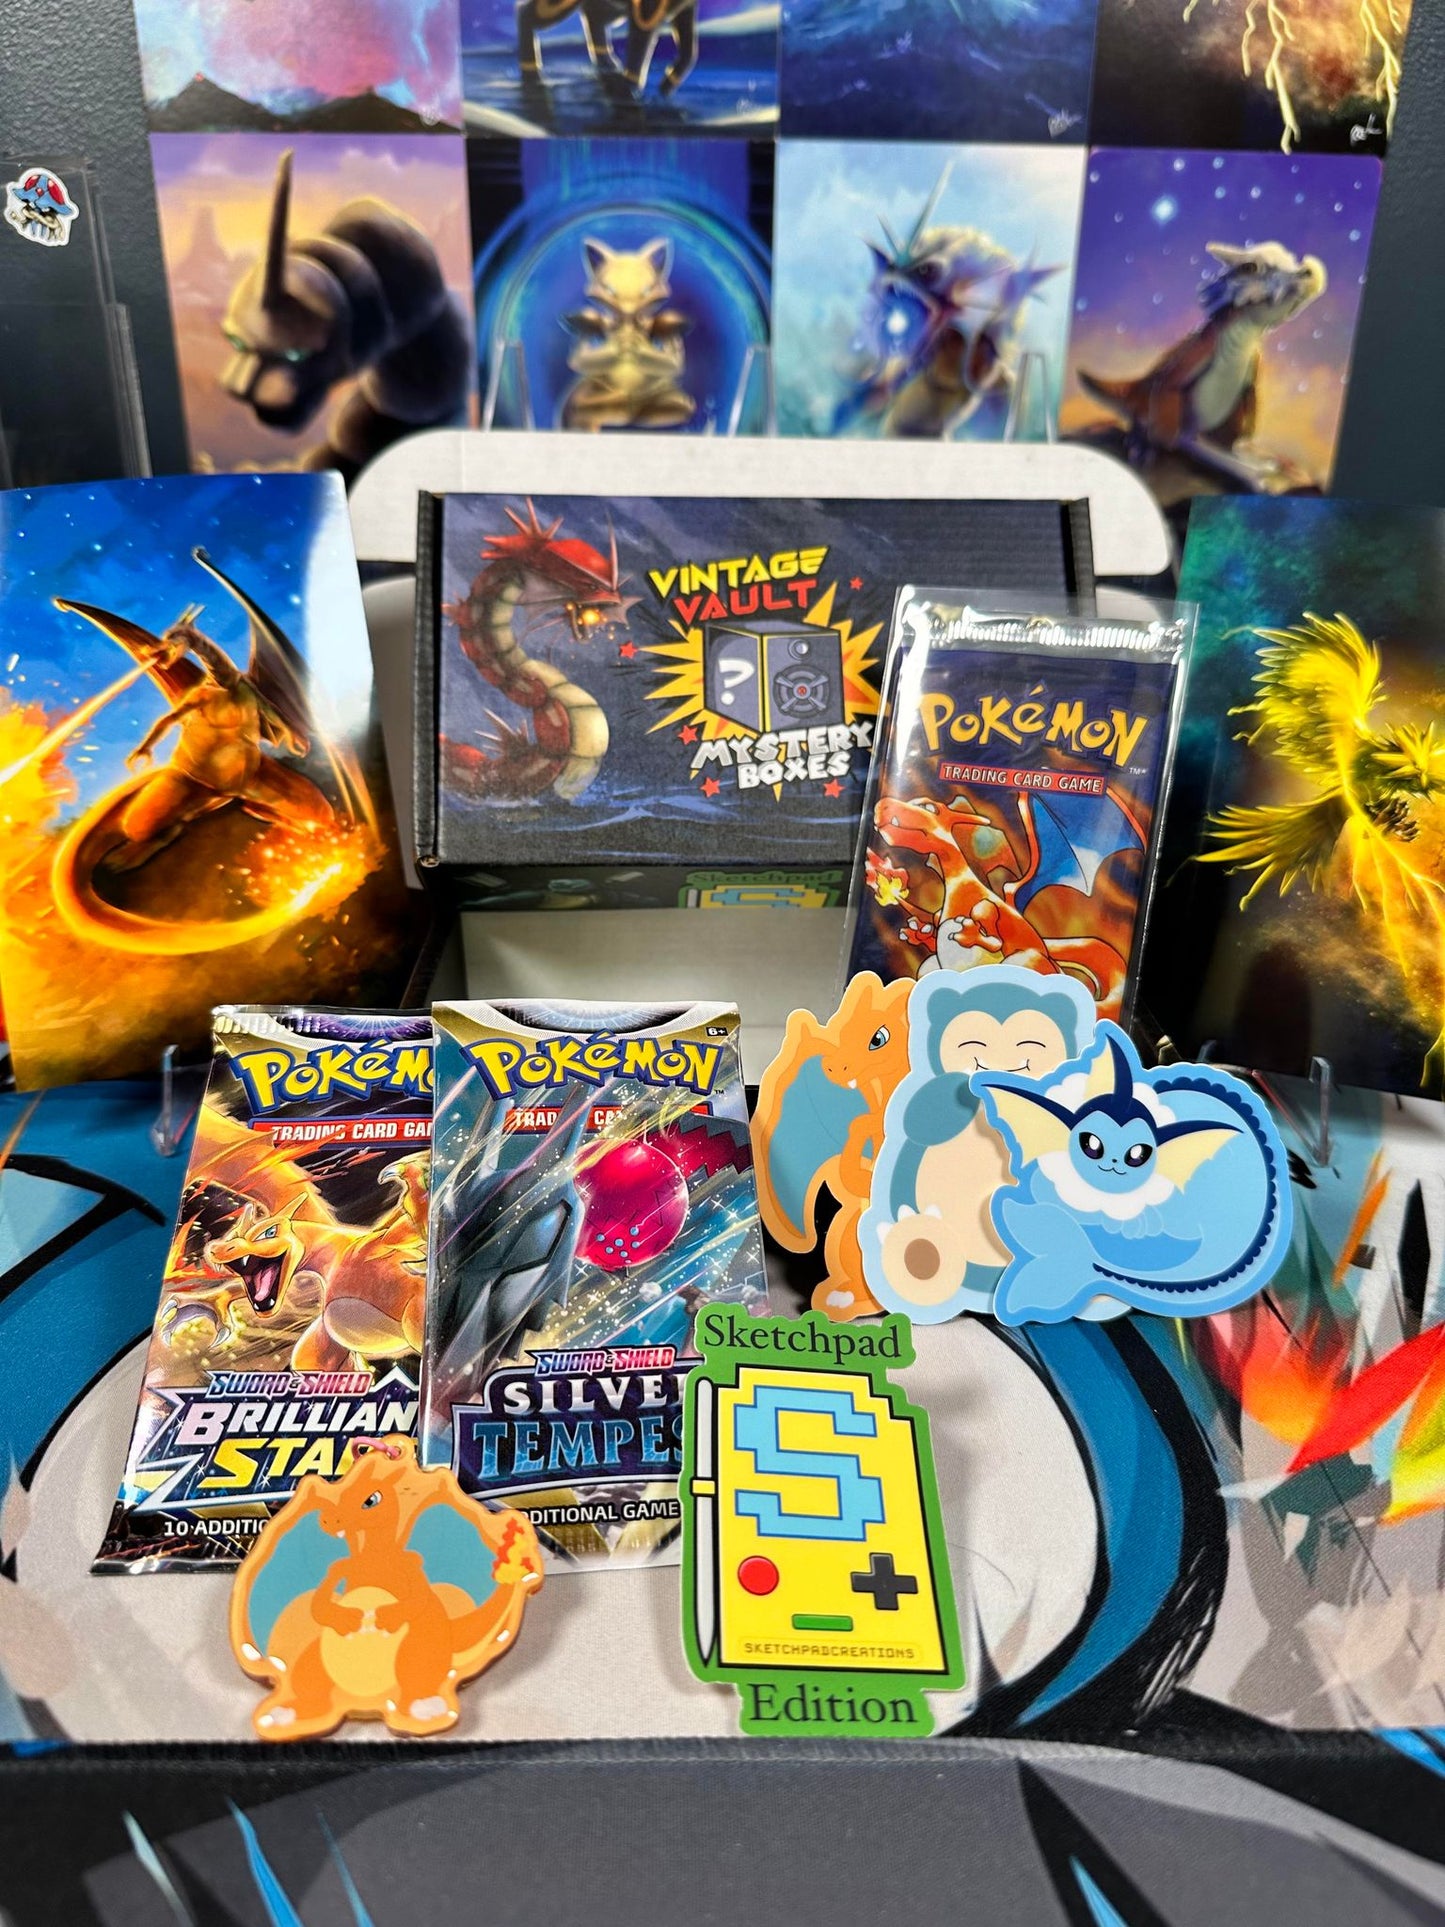 Mystery Box - SKETCHPAD EDITION - DM on Instagram @VintageVaultPokemon for discount!!